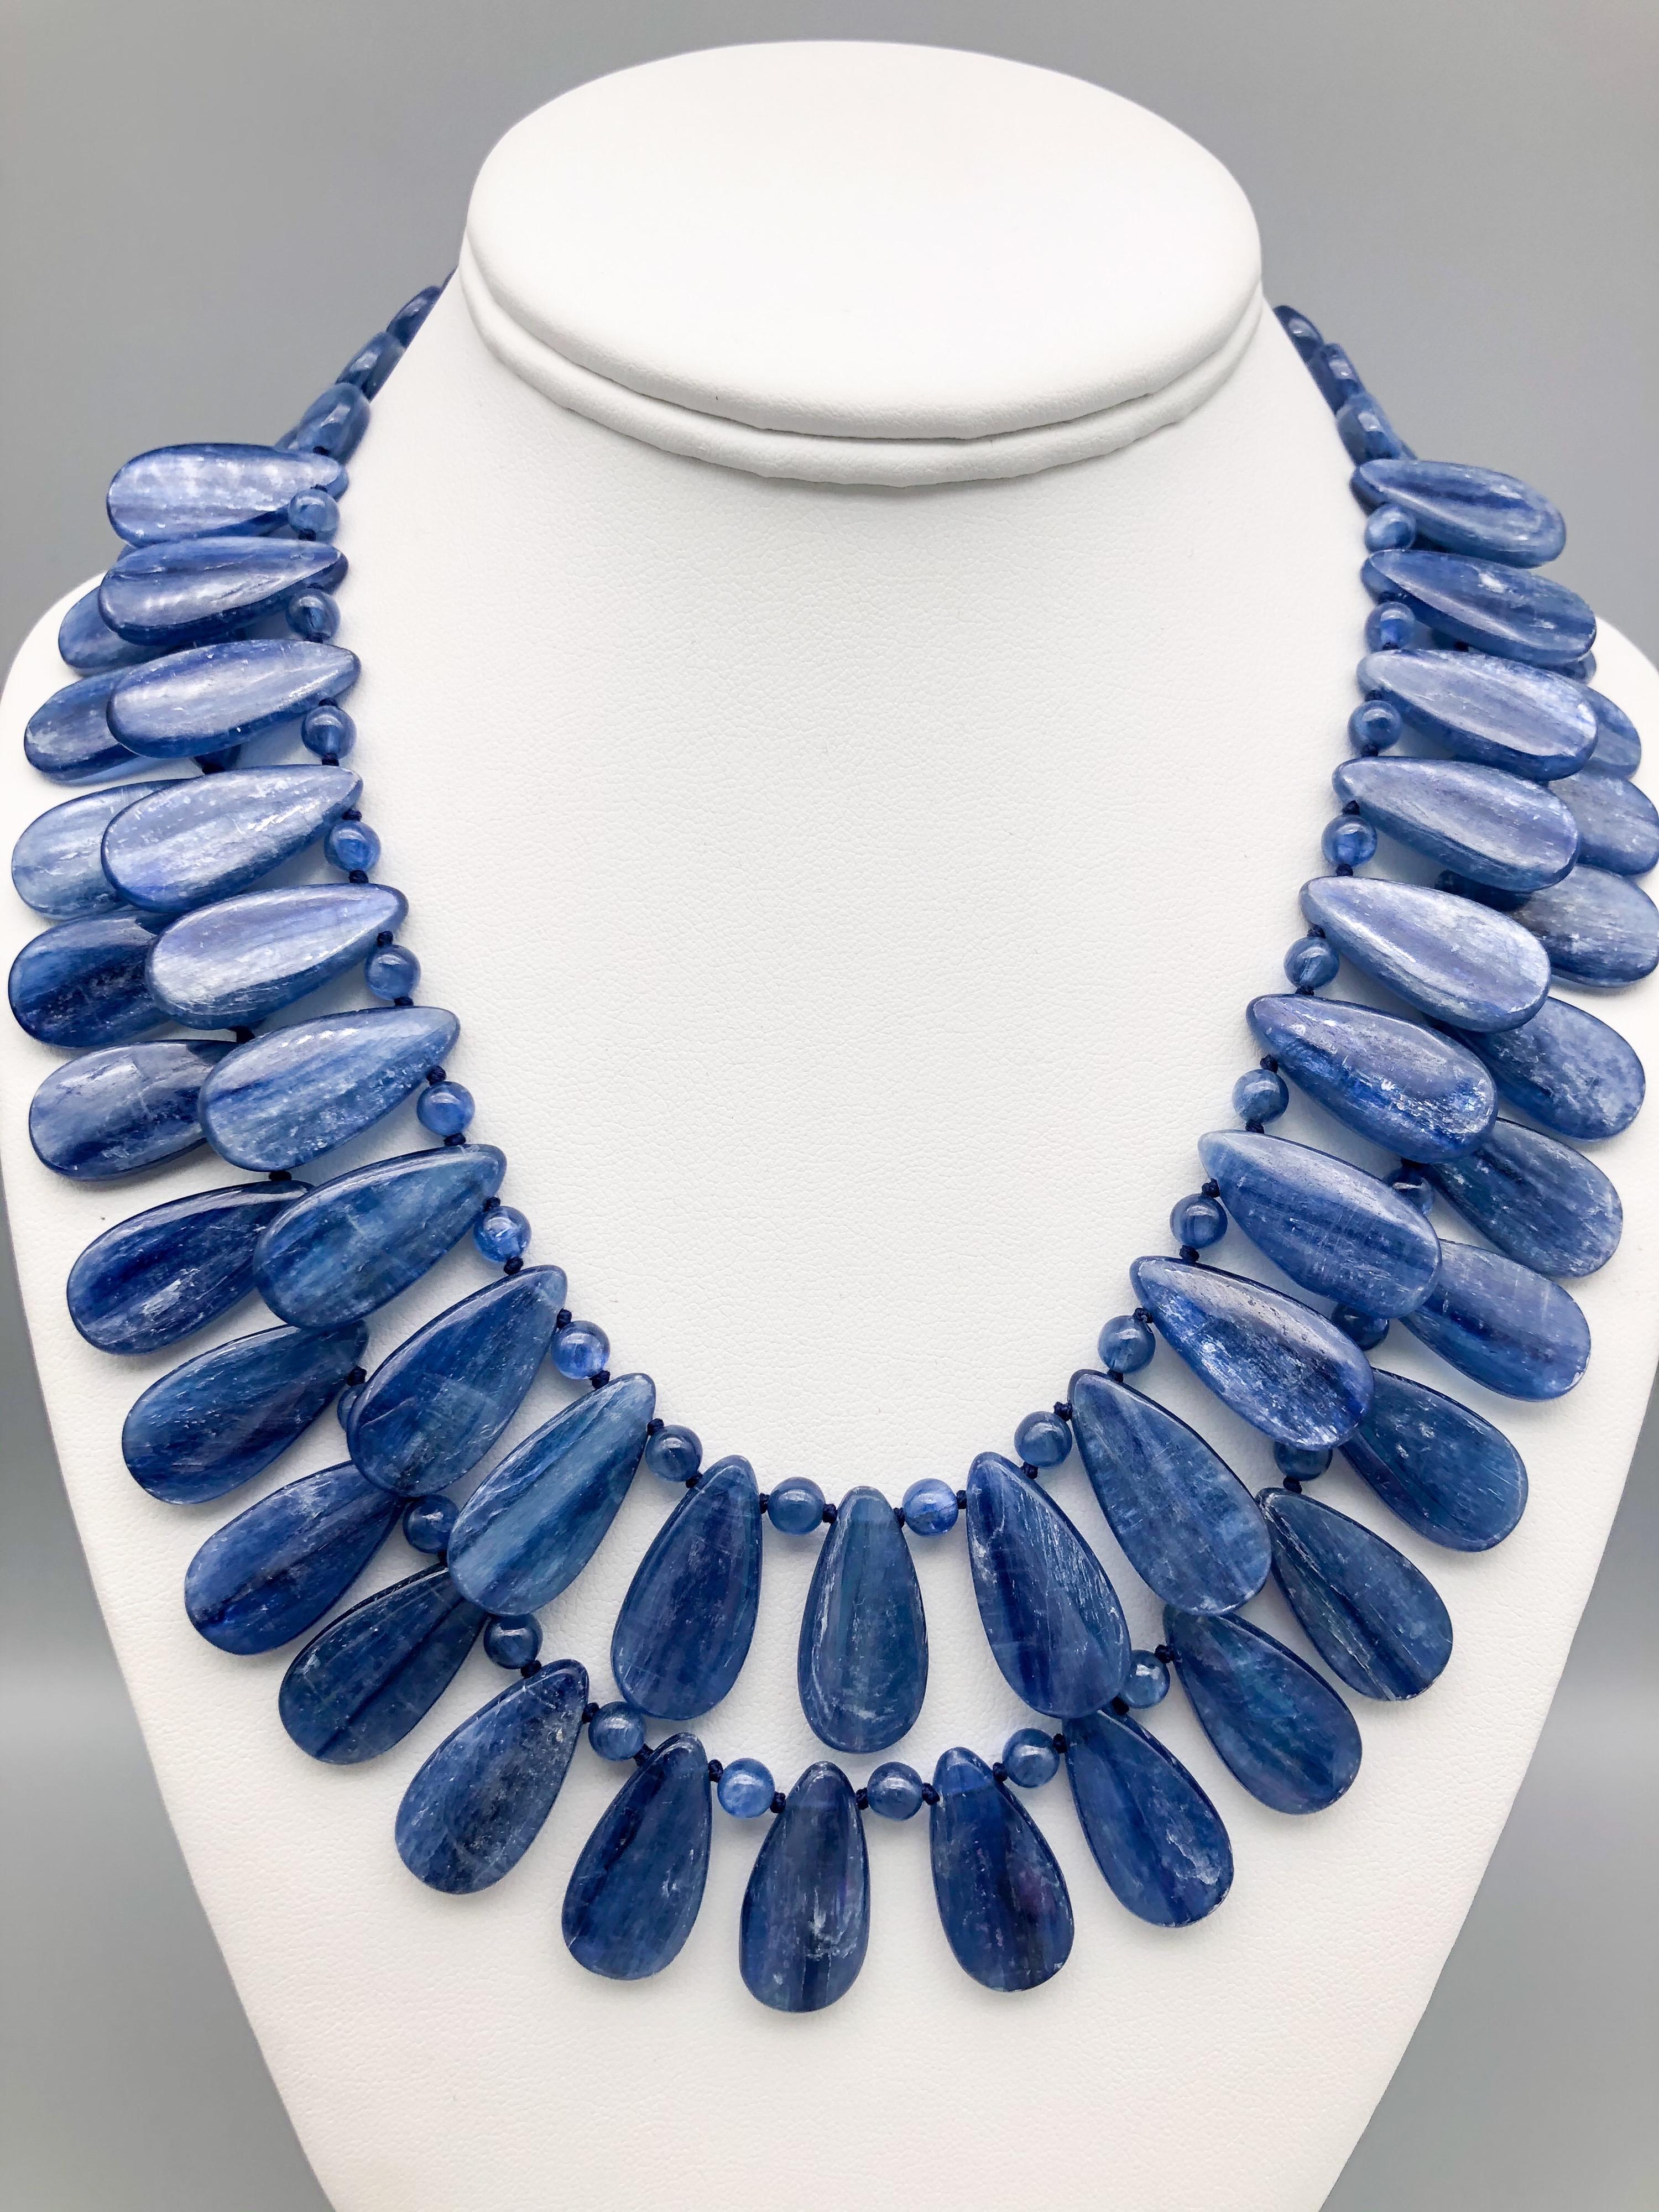 One-of-a-Kind

Kyanite is a gemstone that is prized for its rich and vibrant blue color, which is even stronger and more vibrant than traditional Sapphire. When faceted, Kyanite can often be sold as Sapphire, but it is the natural, highly polished,